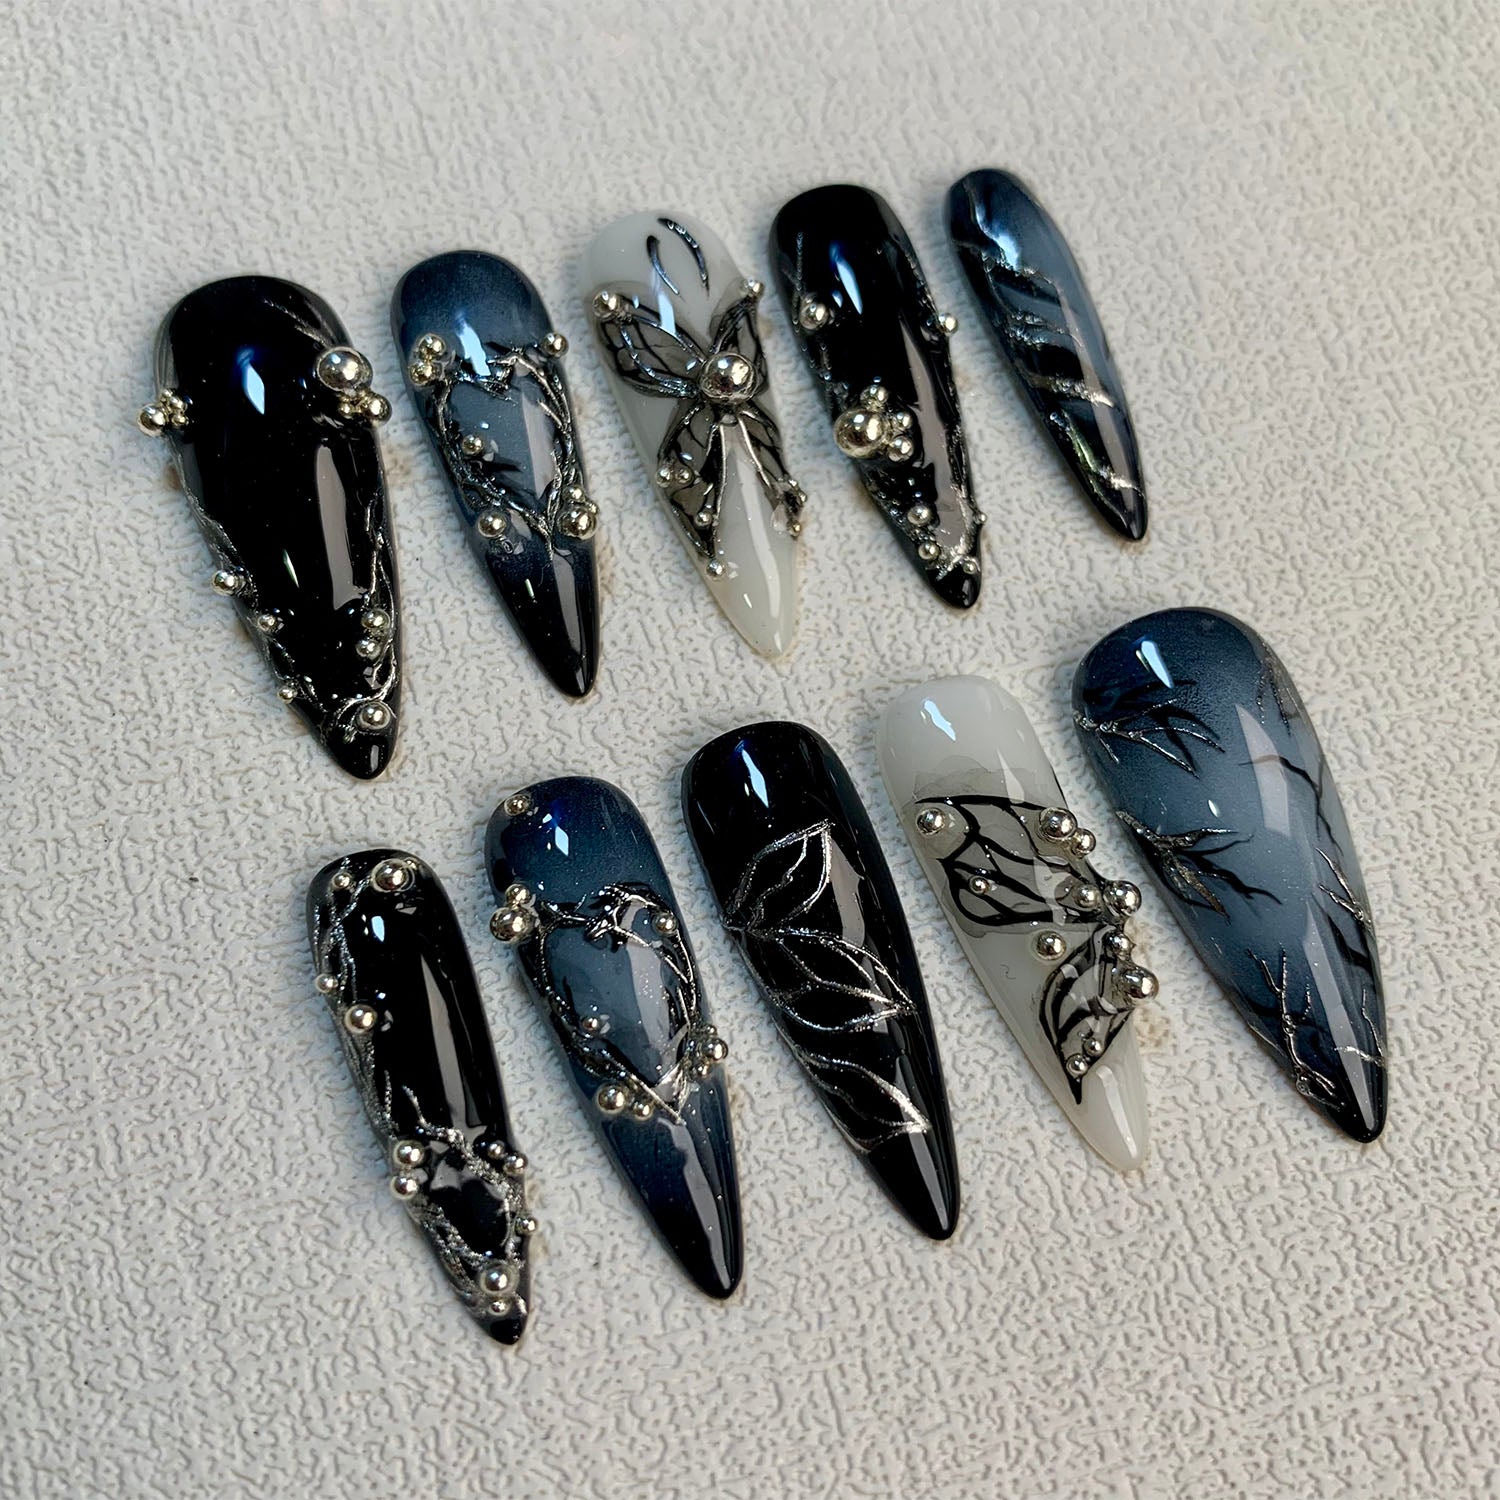 Custom Black Butterfly Press On Nails, Gothic Punk Rock Nails, Goth Butterflies Y2K Fake Nails